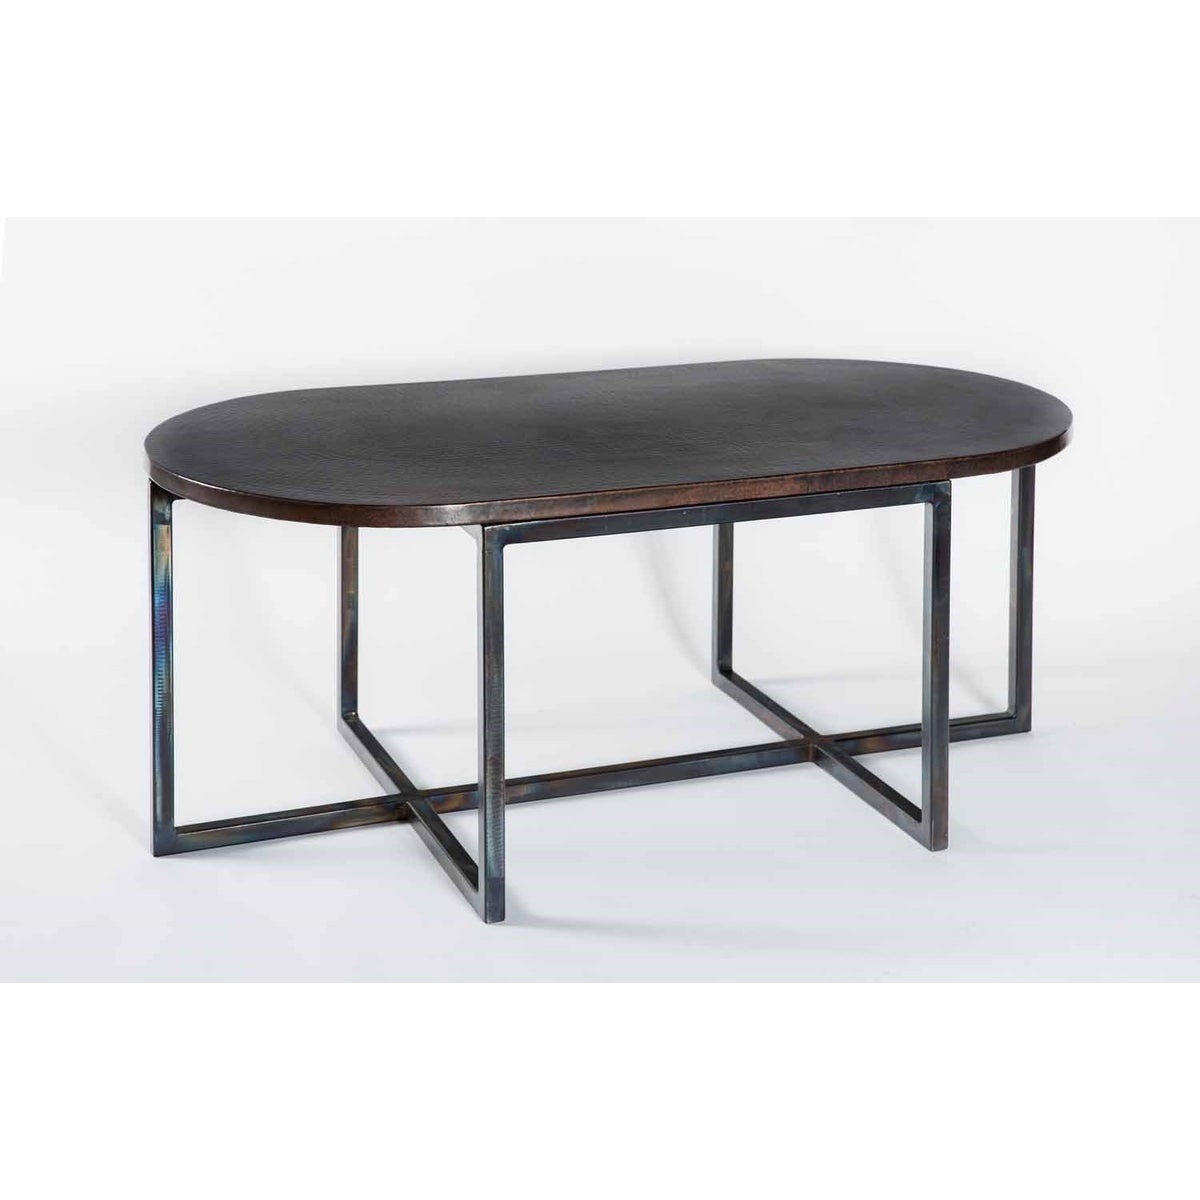 Foster Oval Cocktail Table with Dark Brown Oval Hammered Copper Top